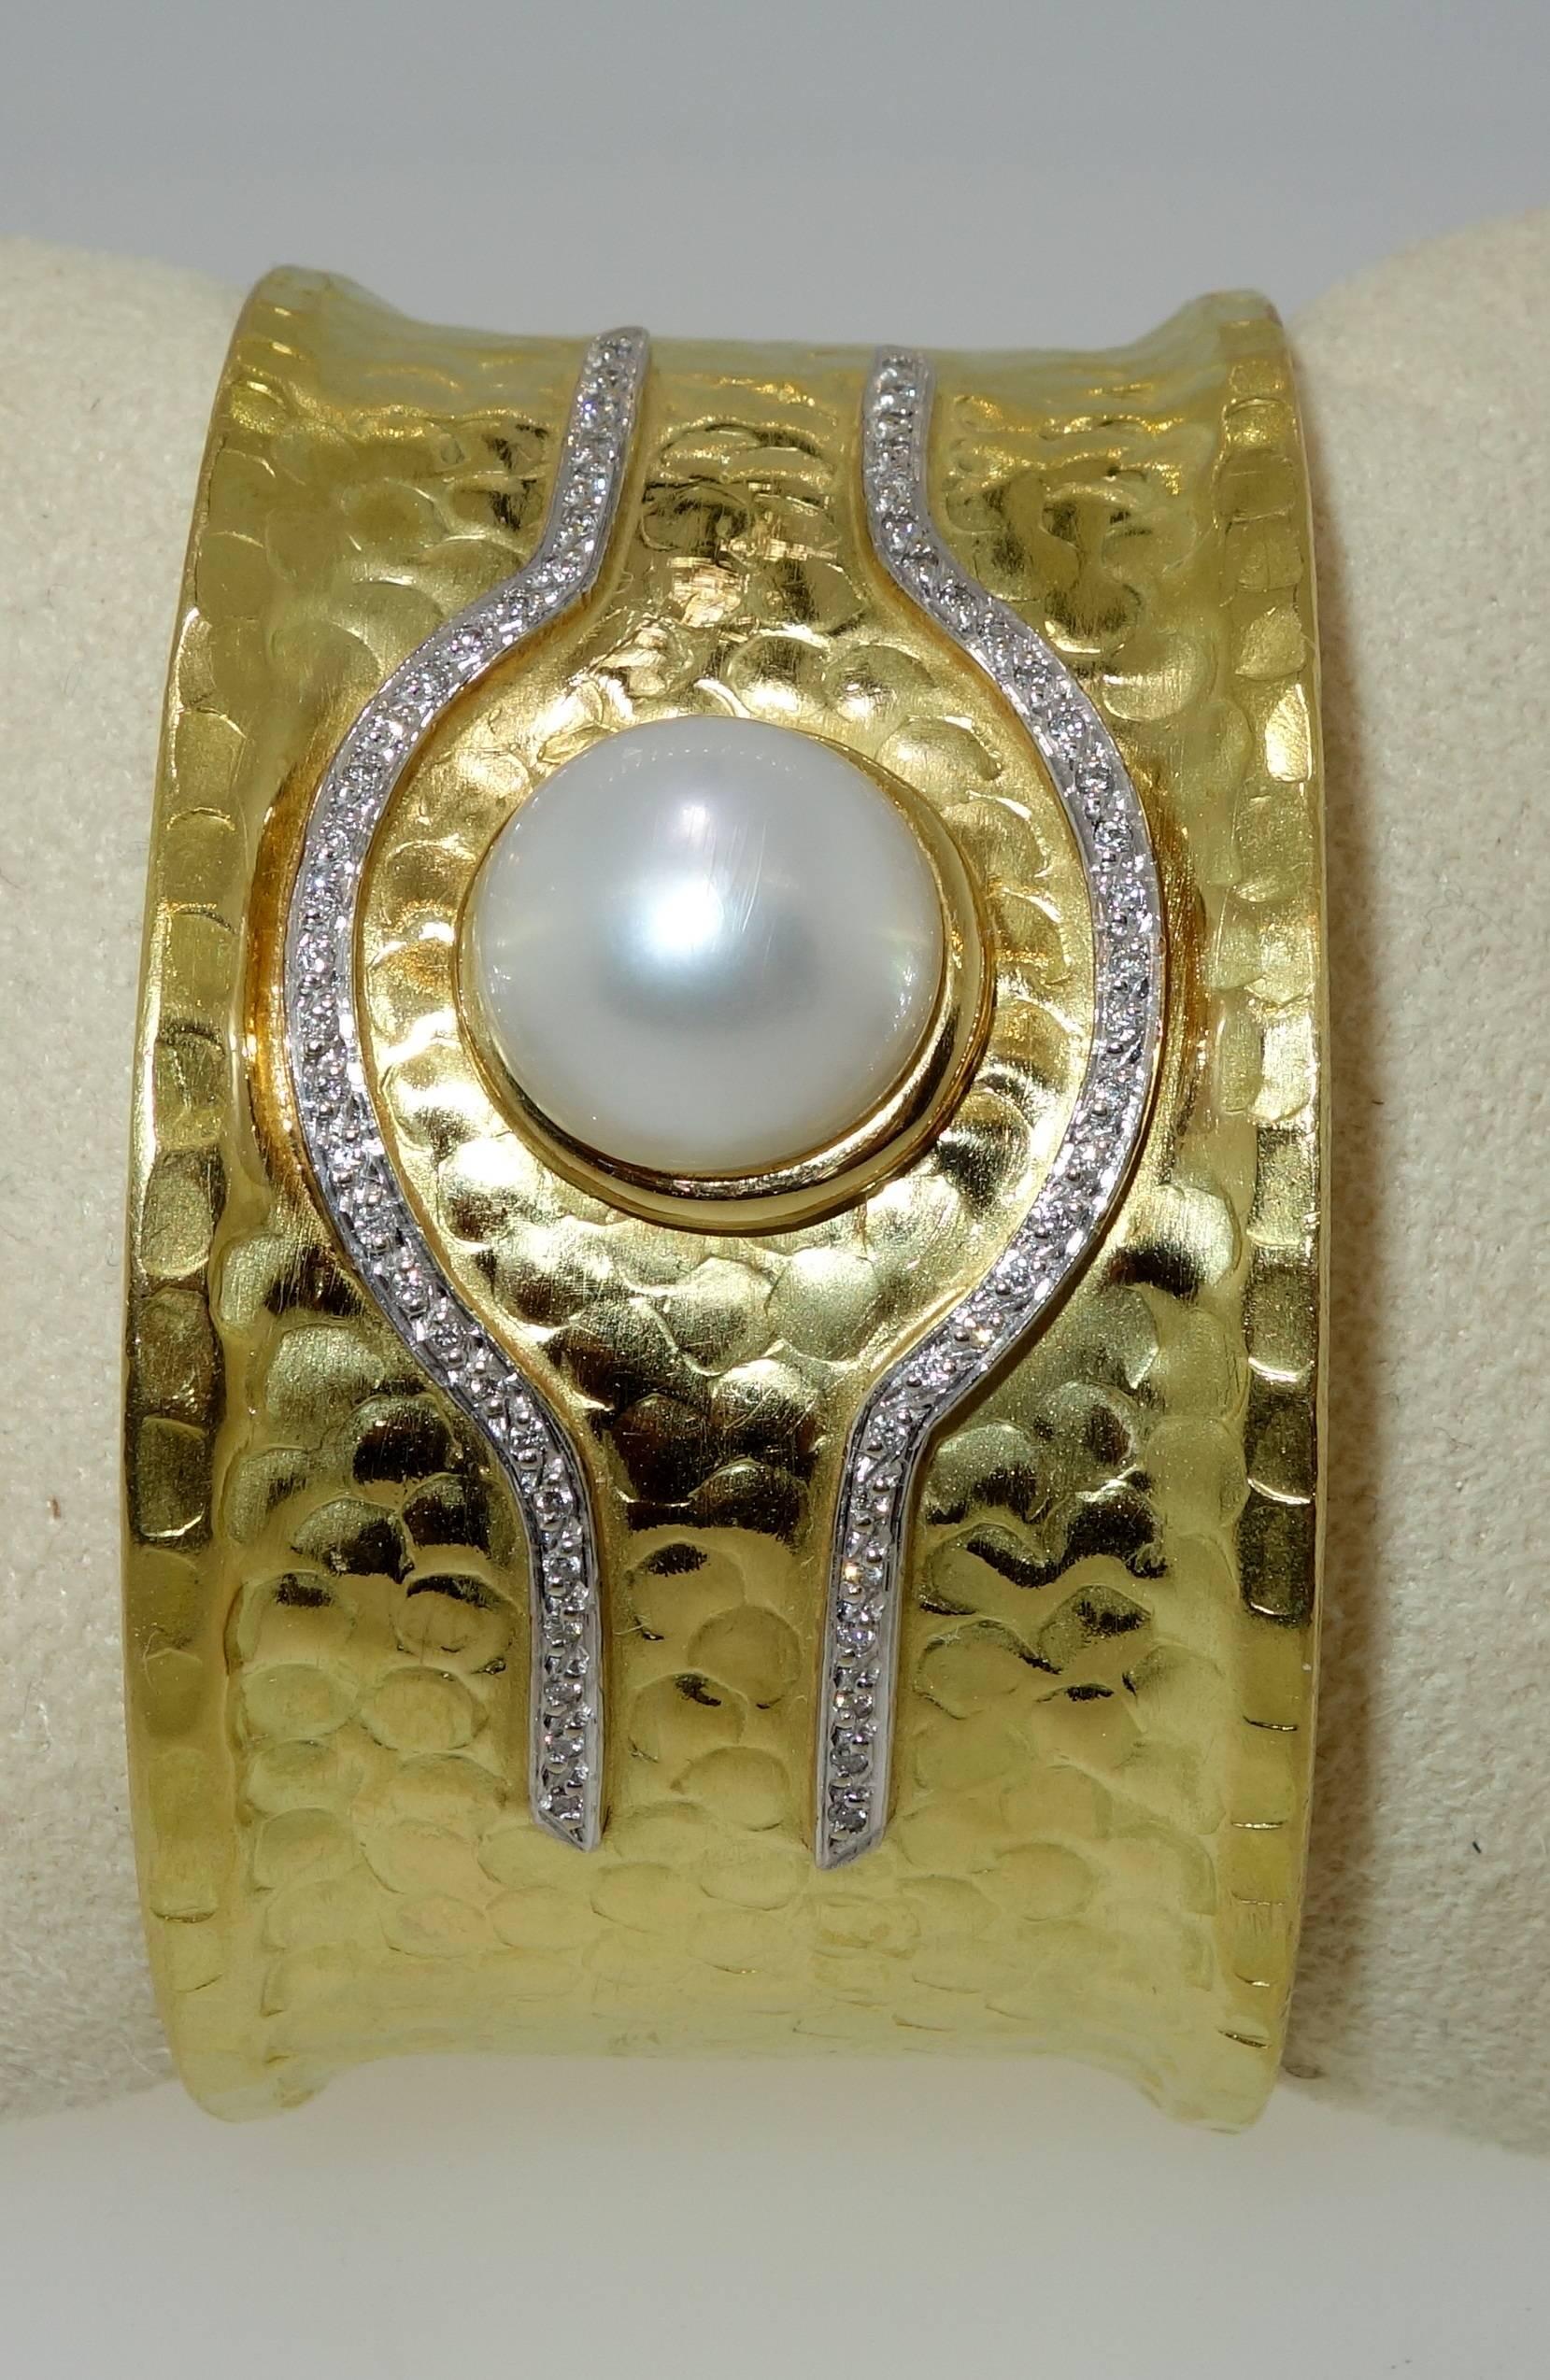 The mabe pearl is 13.4 mm and displays a fine unblemished surface.  There are 58 diamonds all well matched and near colorless (H) and very slightly included.  These diamonds weigh approximately .50 cts.  This cuff bracelet will fit most wrists and